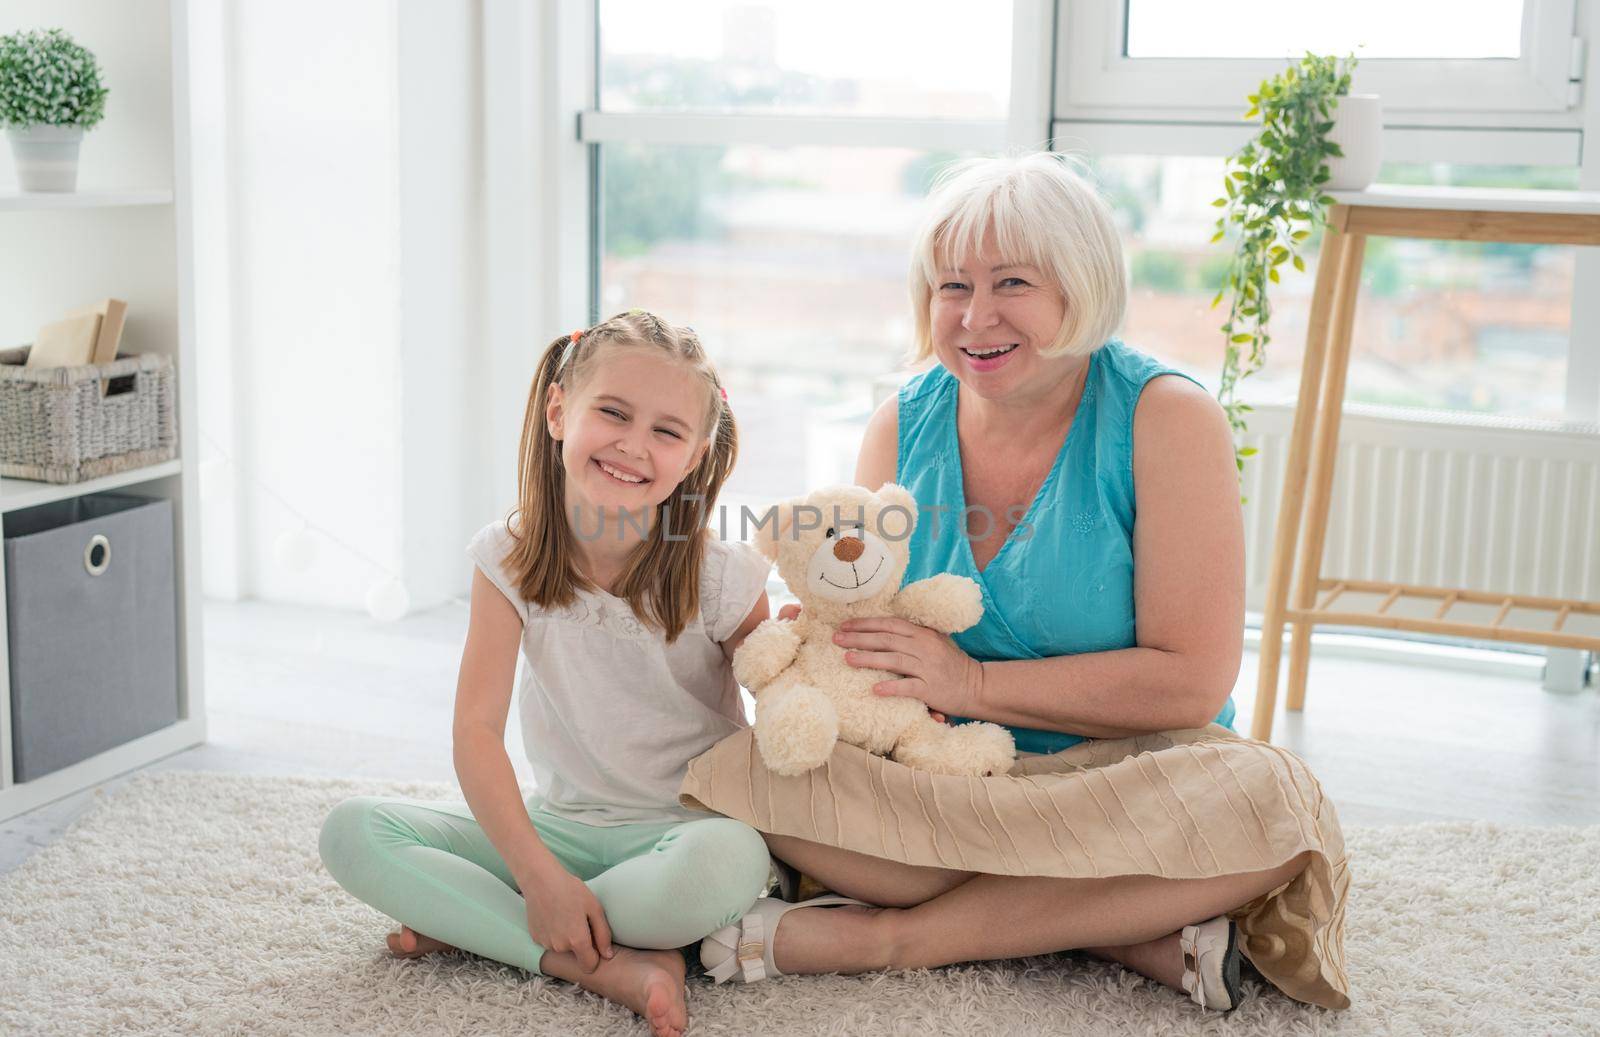 Cute little girl playing plush teddy bear toy with mature woman sitting on floor in modern apartment